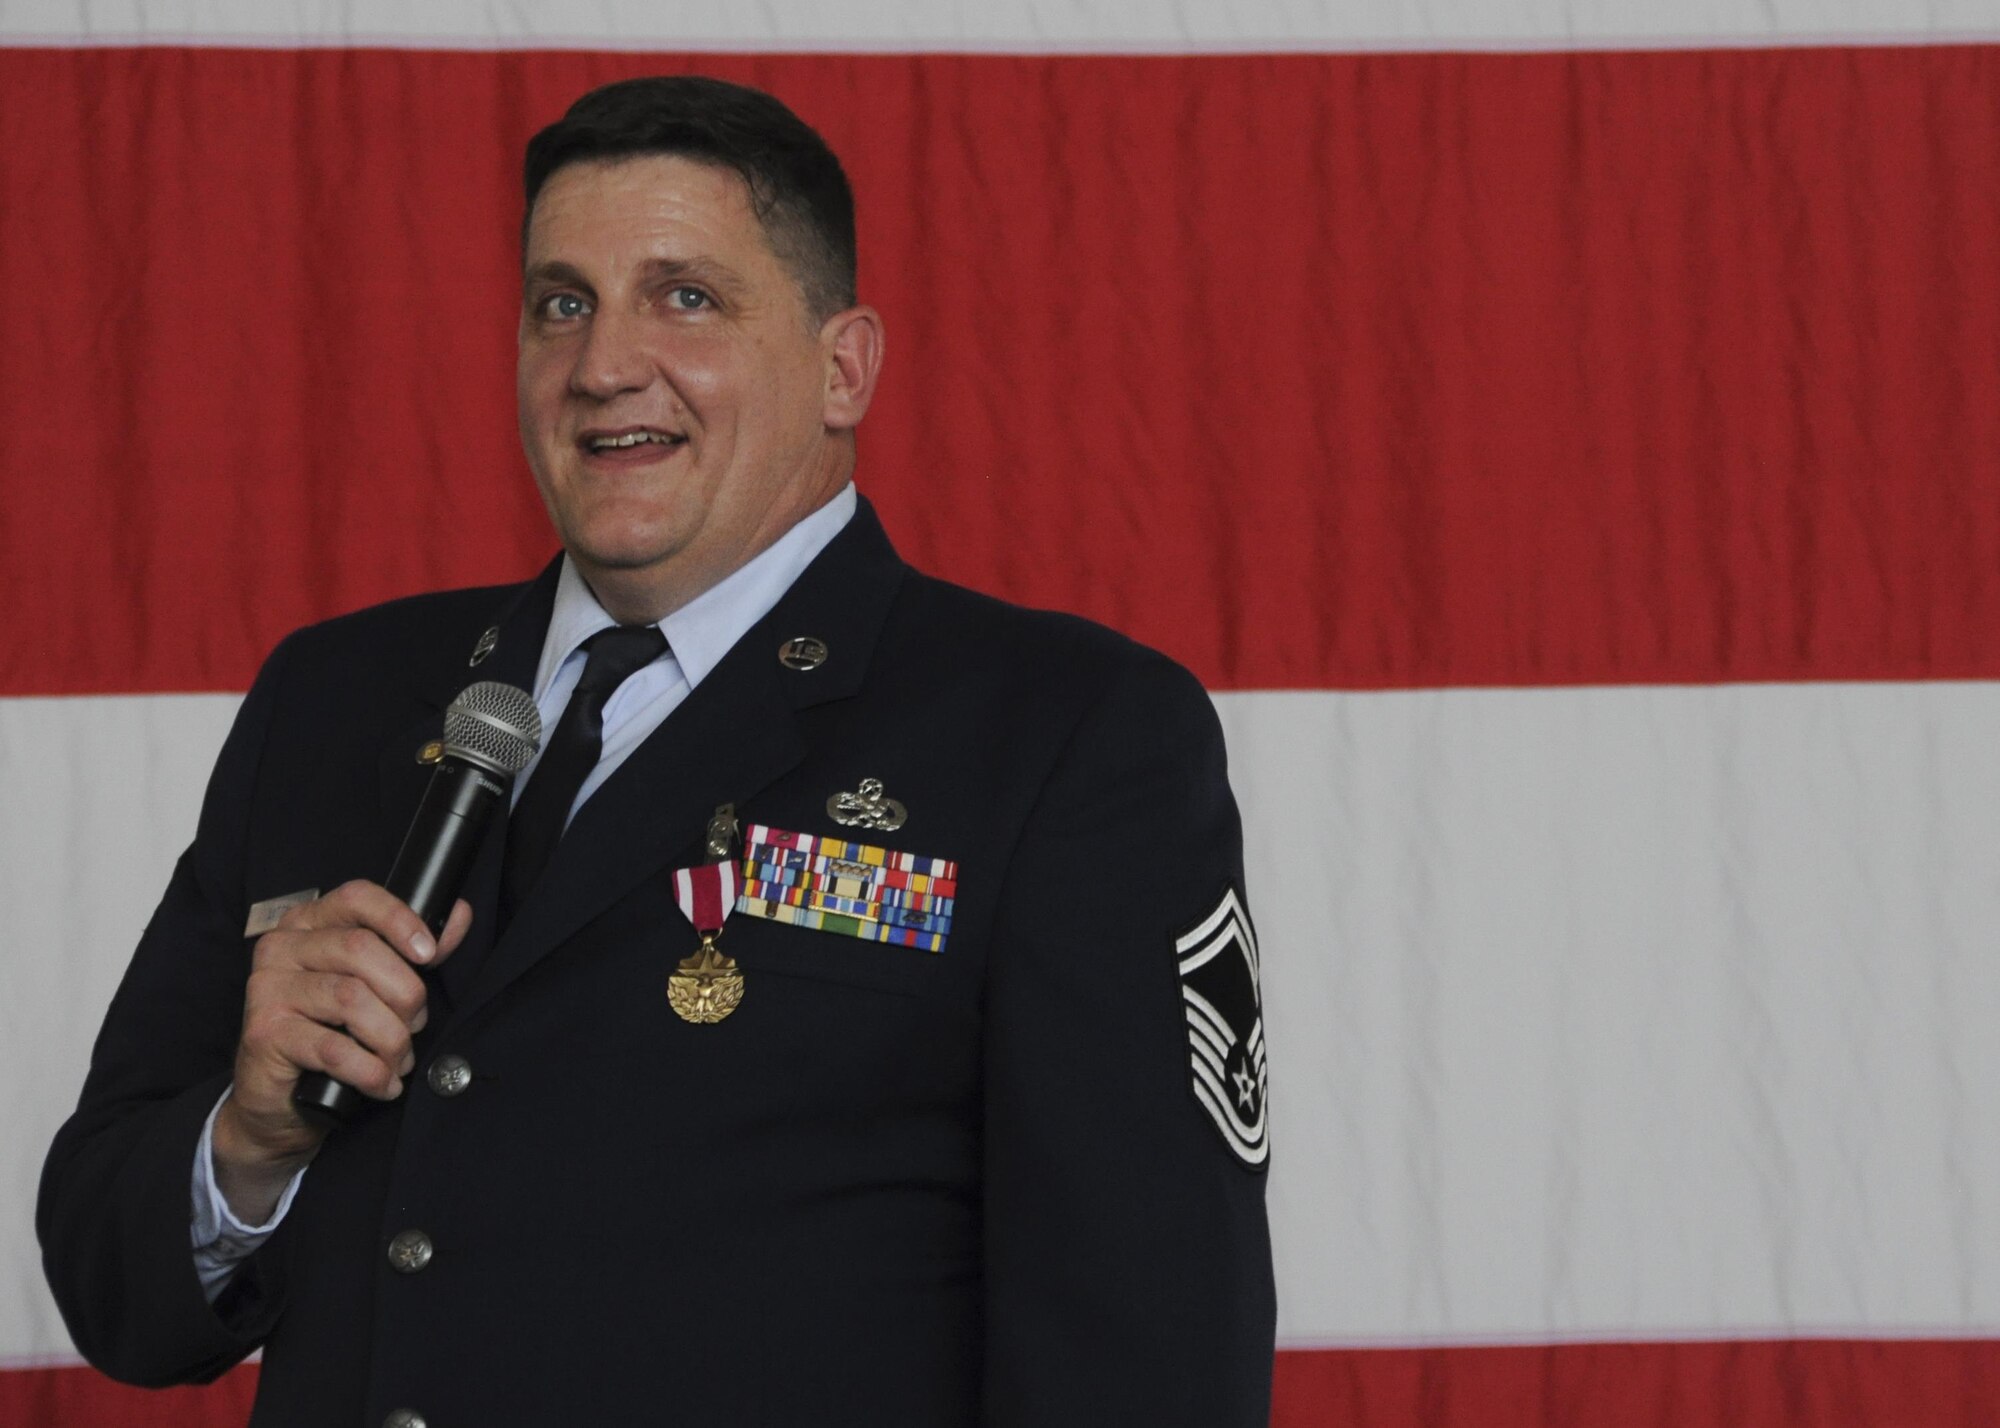 Senior Master Sgt. Anthony Axton, 442nd Aircraft Maintenance Squadron Accessory Flight Chief, addresses the crowd during his retirement ceremony at Whiteman Air Force Base, Mo., Oct. 16, 2016. In 1985, he enlisted into the 442nd Consolidated Aircraft Maintenance Squadron. He took a break in service from 91-96 until he re-enlisted in 2007. During his cross-training to become the fuels system section chief he was awarded distinguished graduate and was one of the few Airmen who has obtained 100% in the entire course. (U.S. Air Force photo/Senior Airman Missy Sterling)